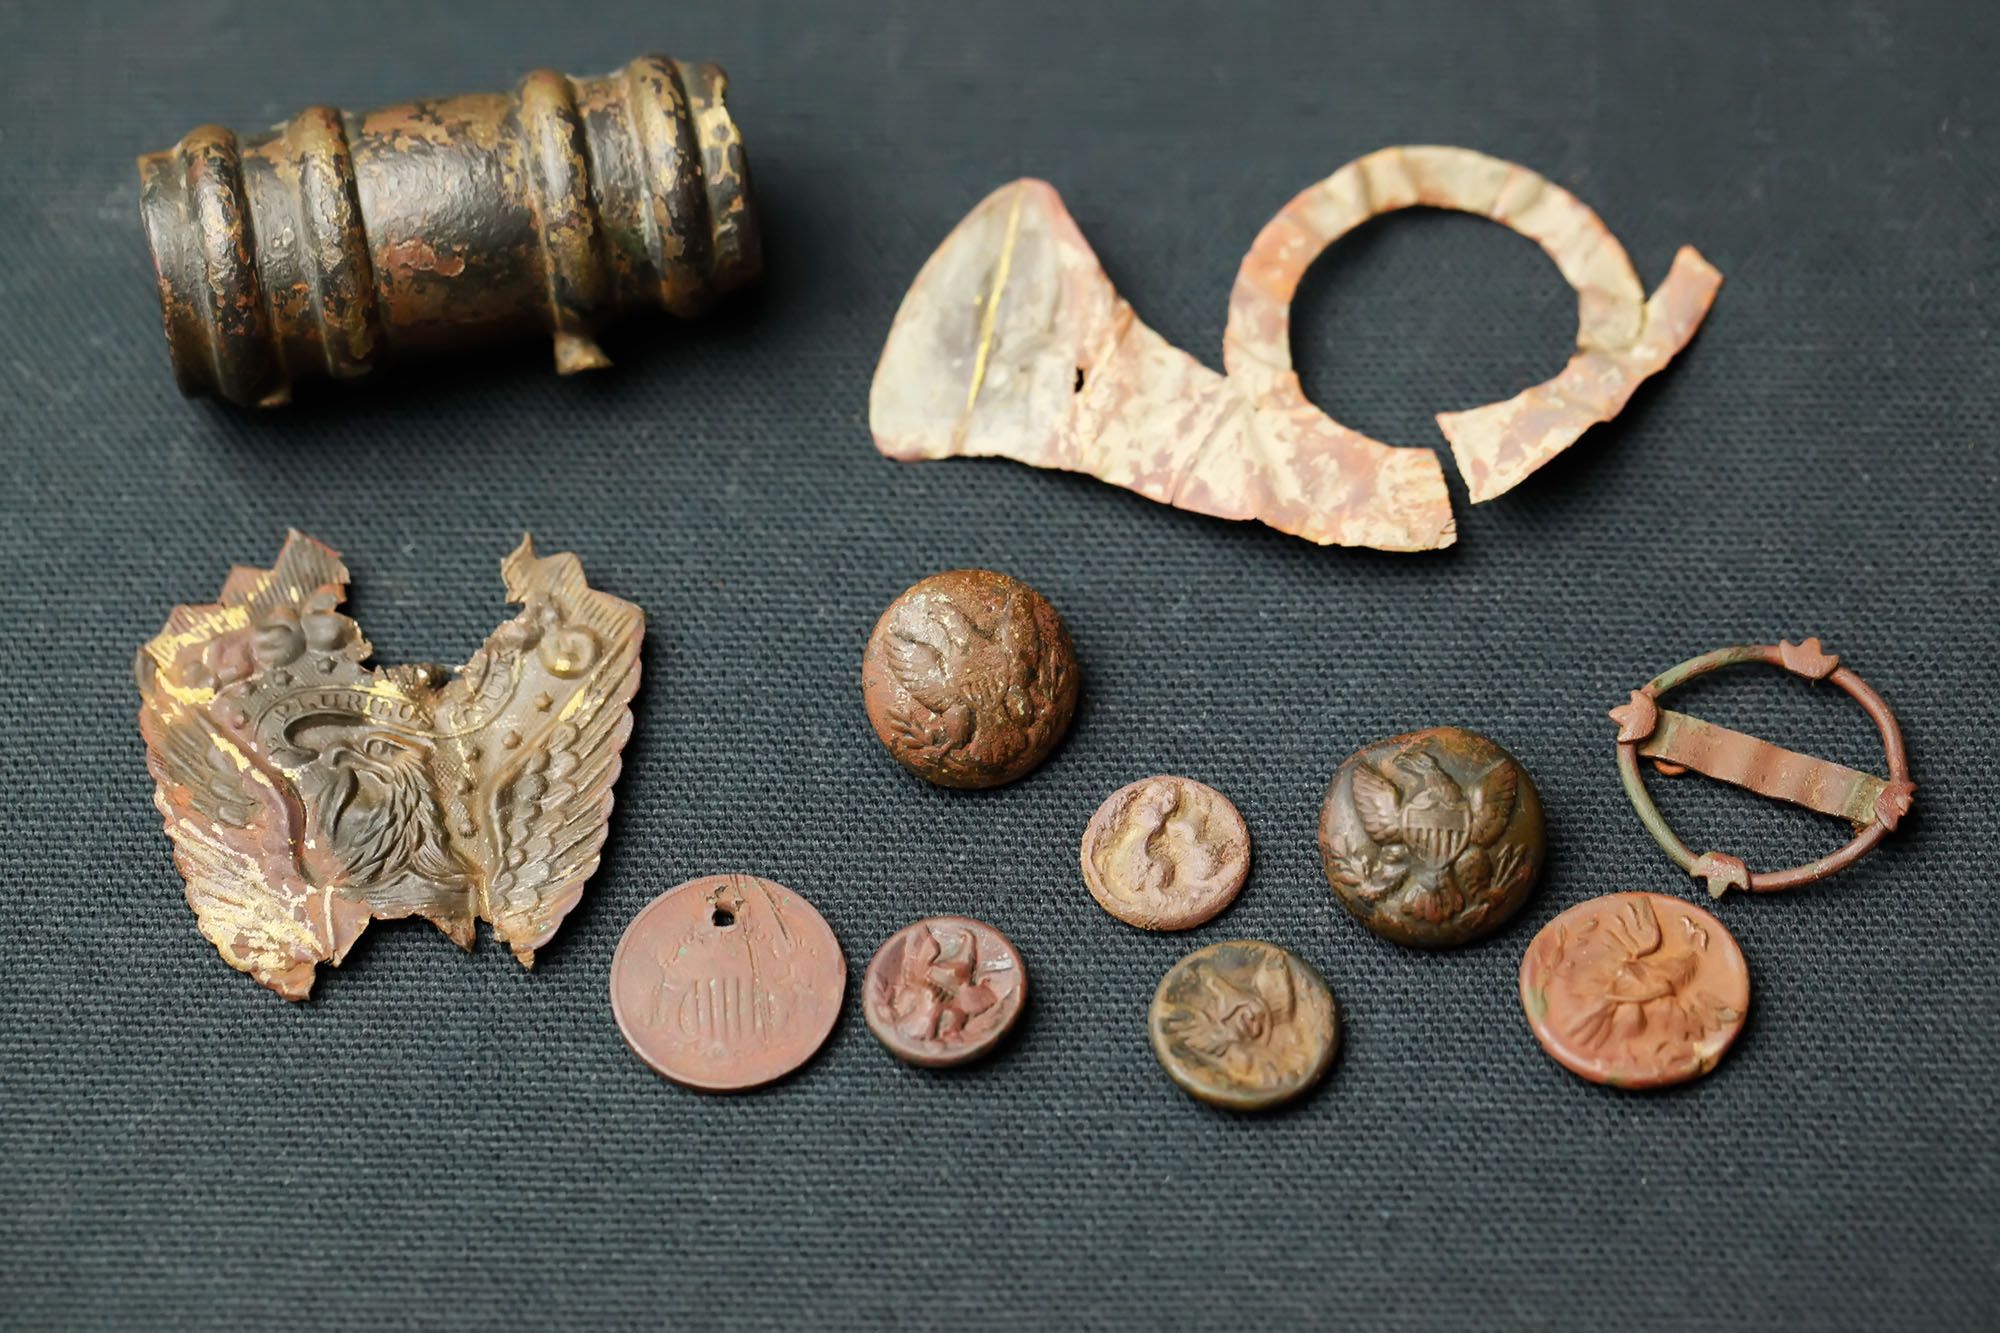 Close Up - Some of the better finds from the fort site